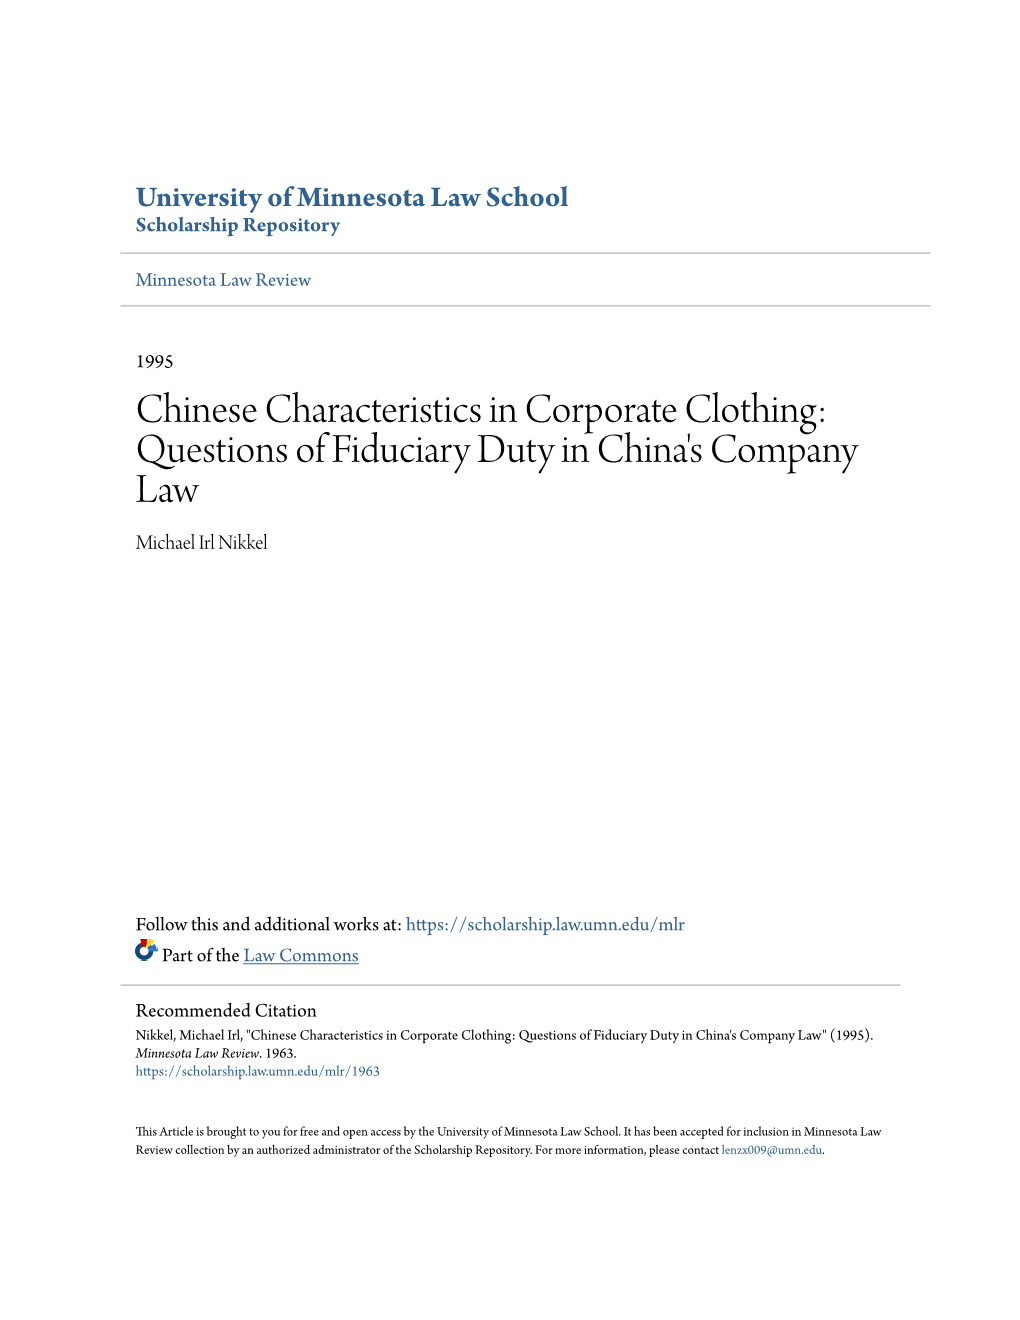 Chinese Characteristics in Corporate Clothing: Questions of Fiduciary Duty in China's Company Law Michael Irl Nikkel